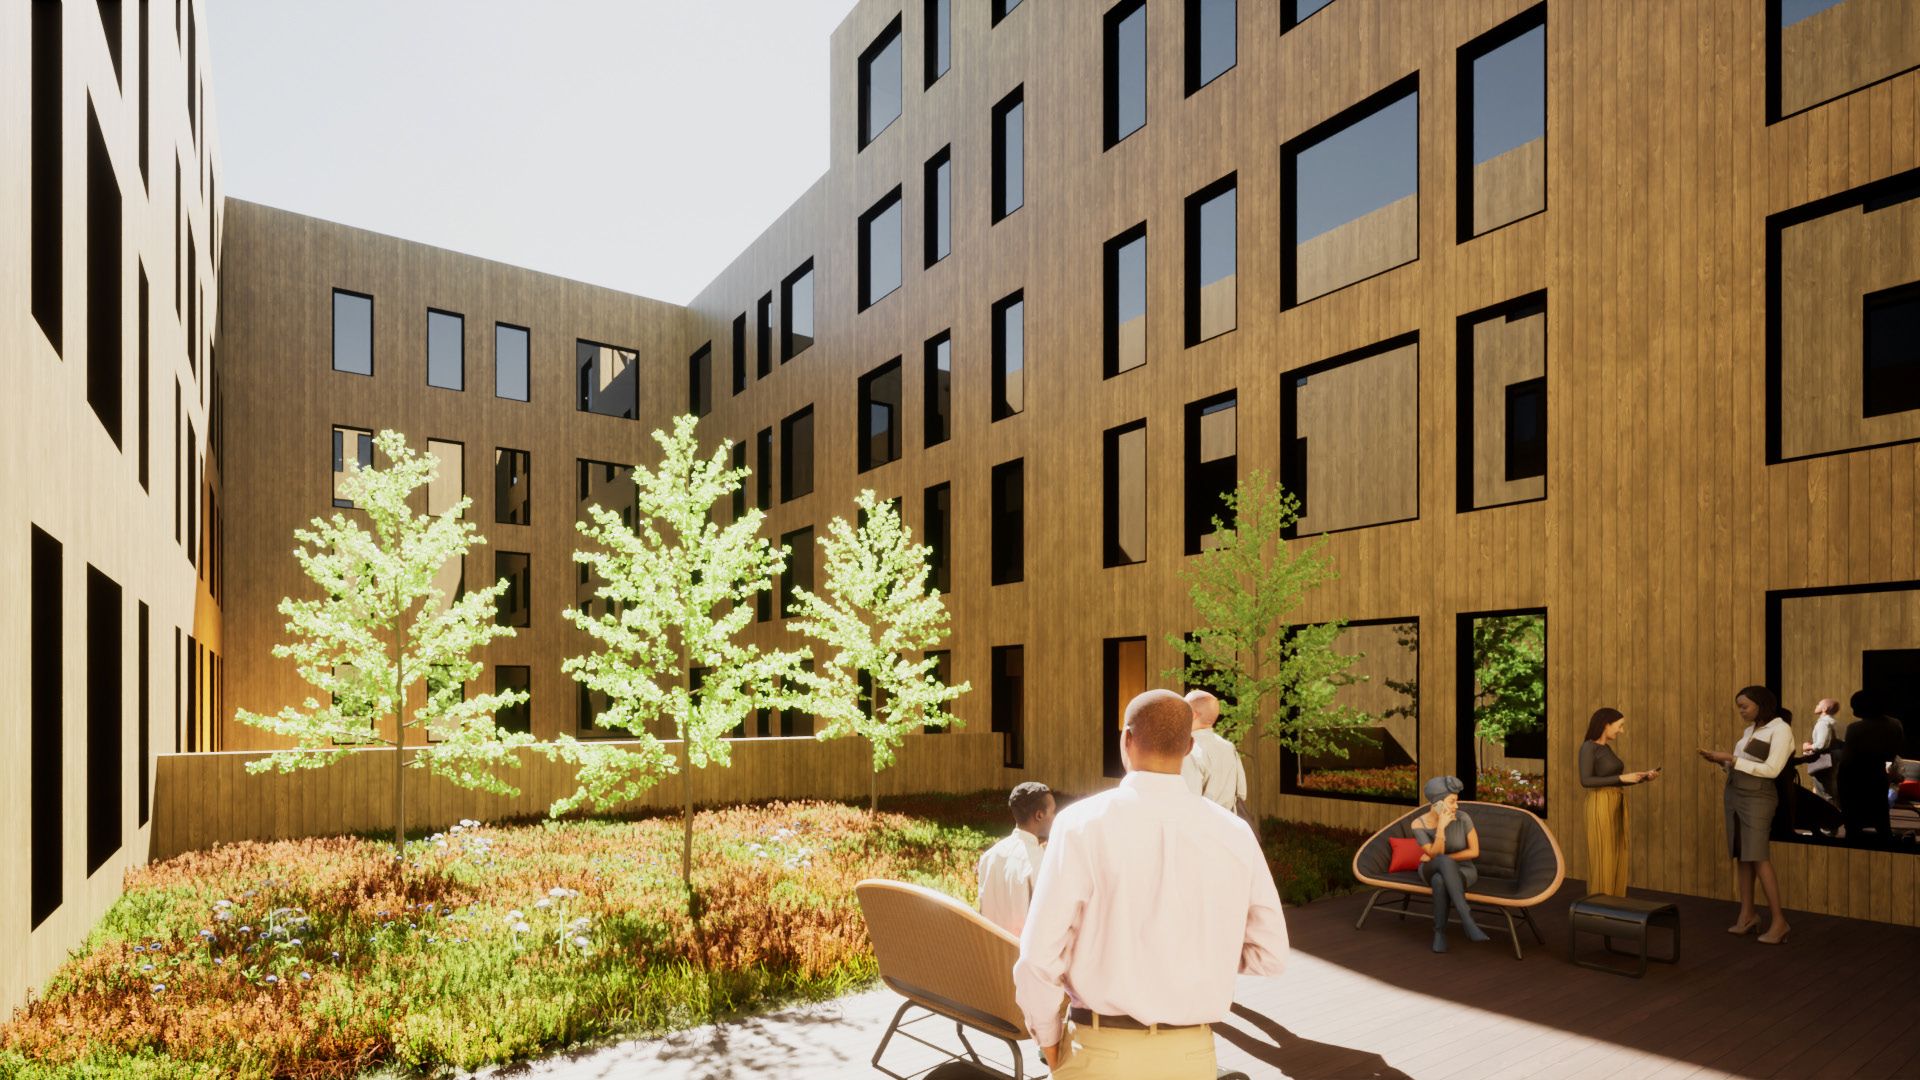 2024-28 North 22nd Street. Building rendering (courtyard). Credit: Oombra Architects via the Civic Design Review